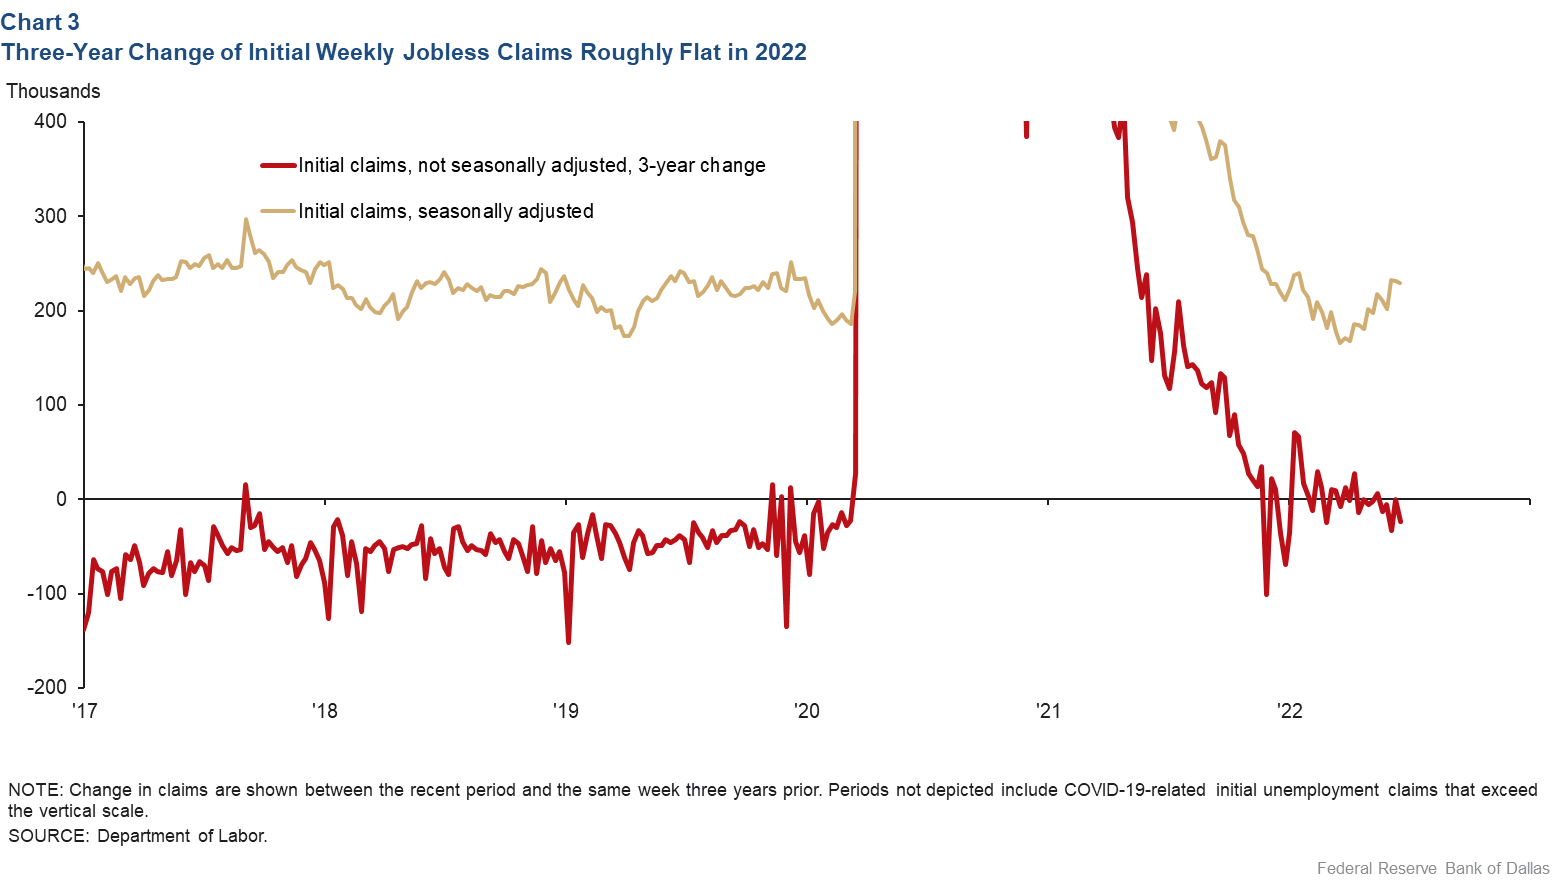 Chart 3: Three-Year Change of Initial Weekly Jobless Claims Roughly Flat in 2022